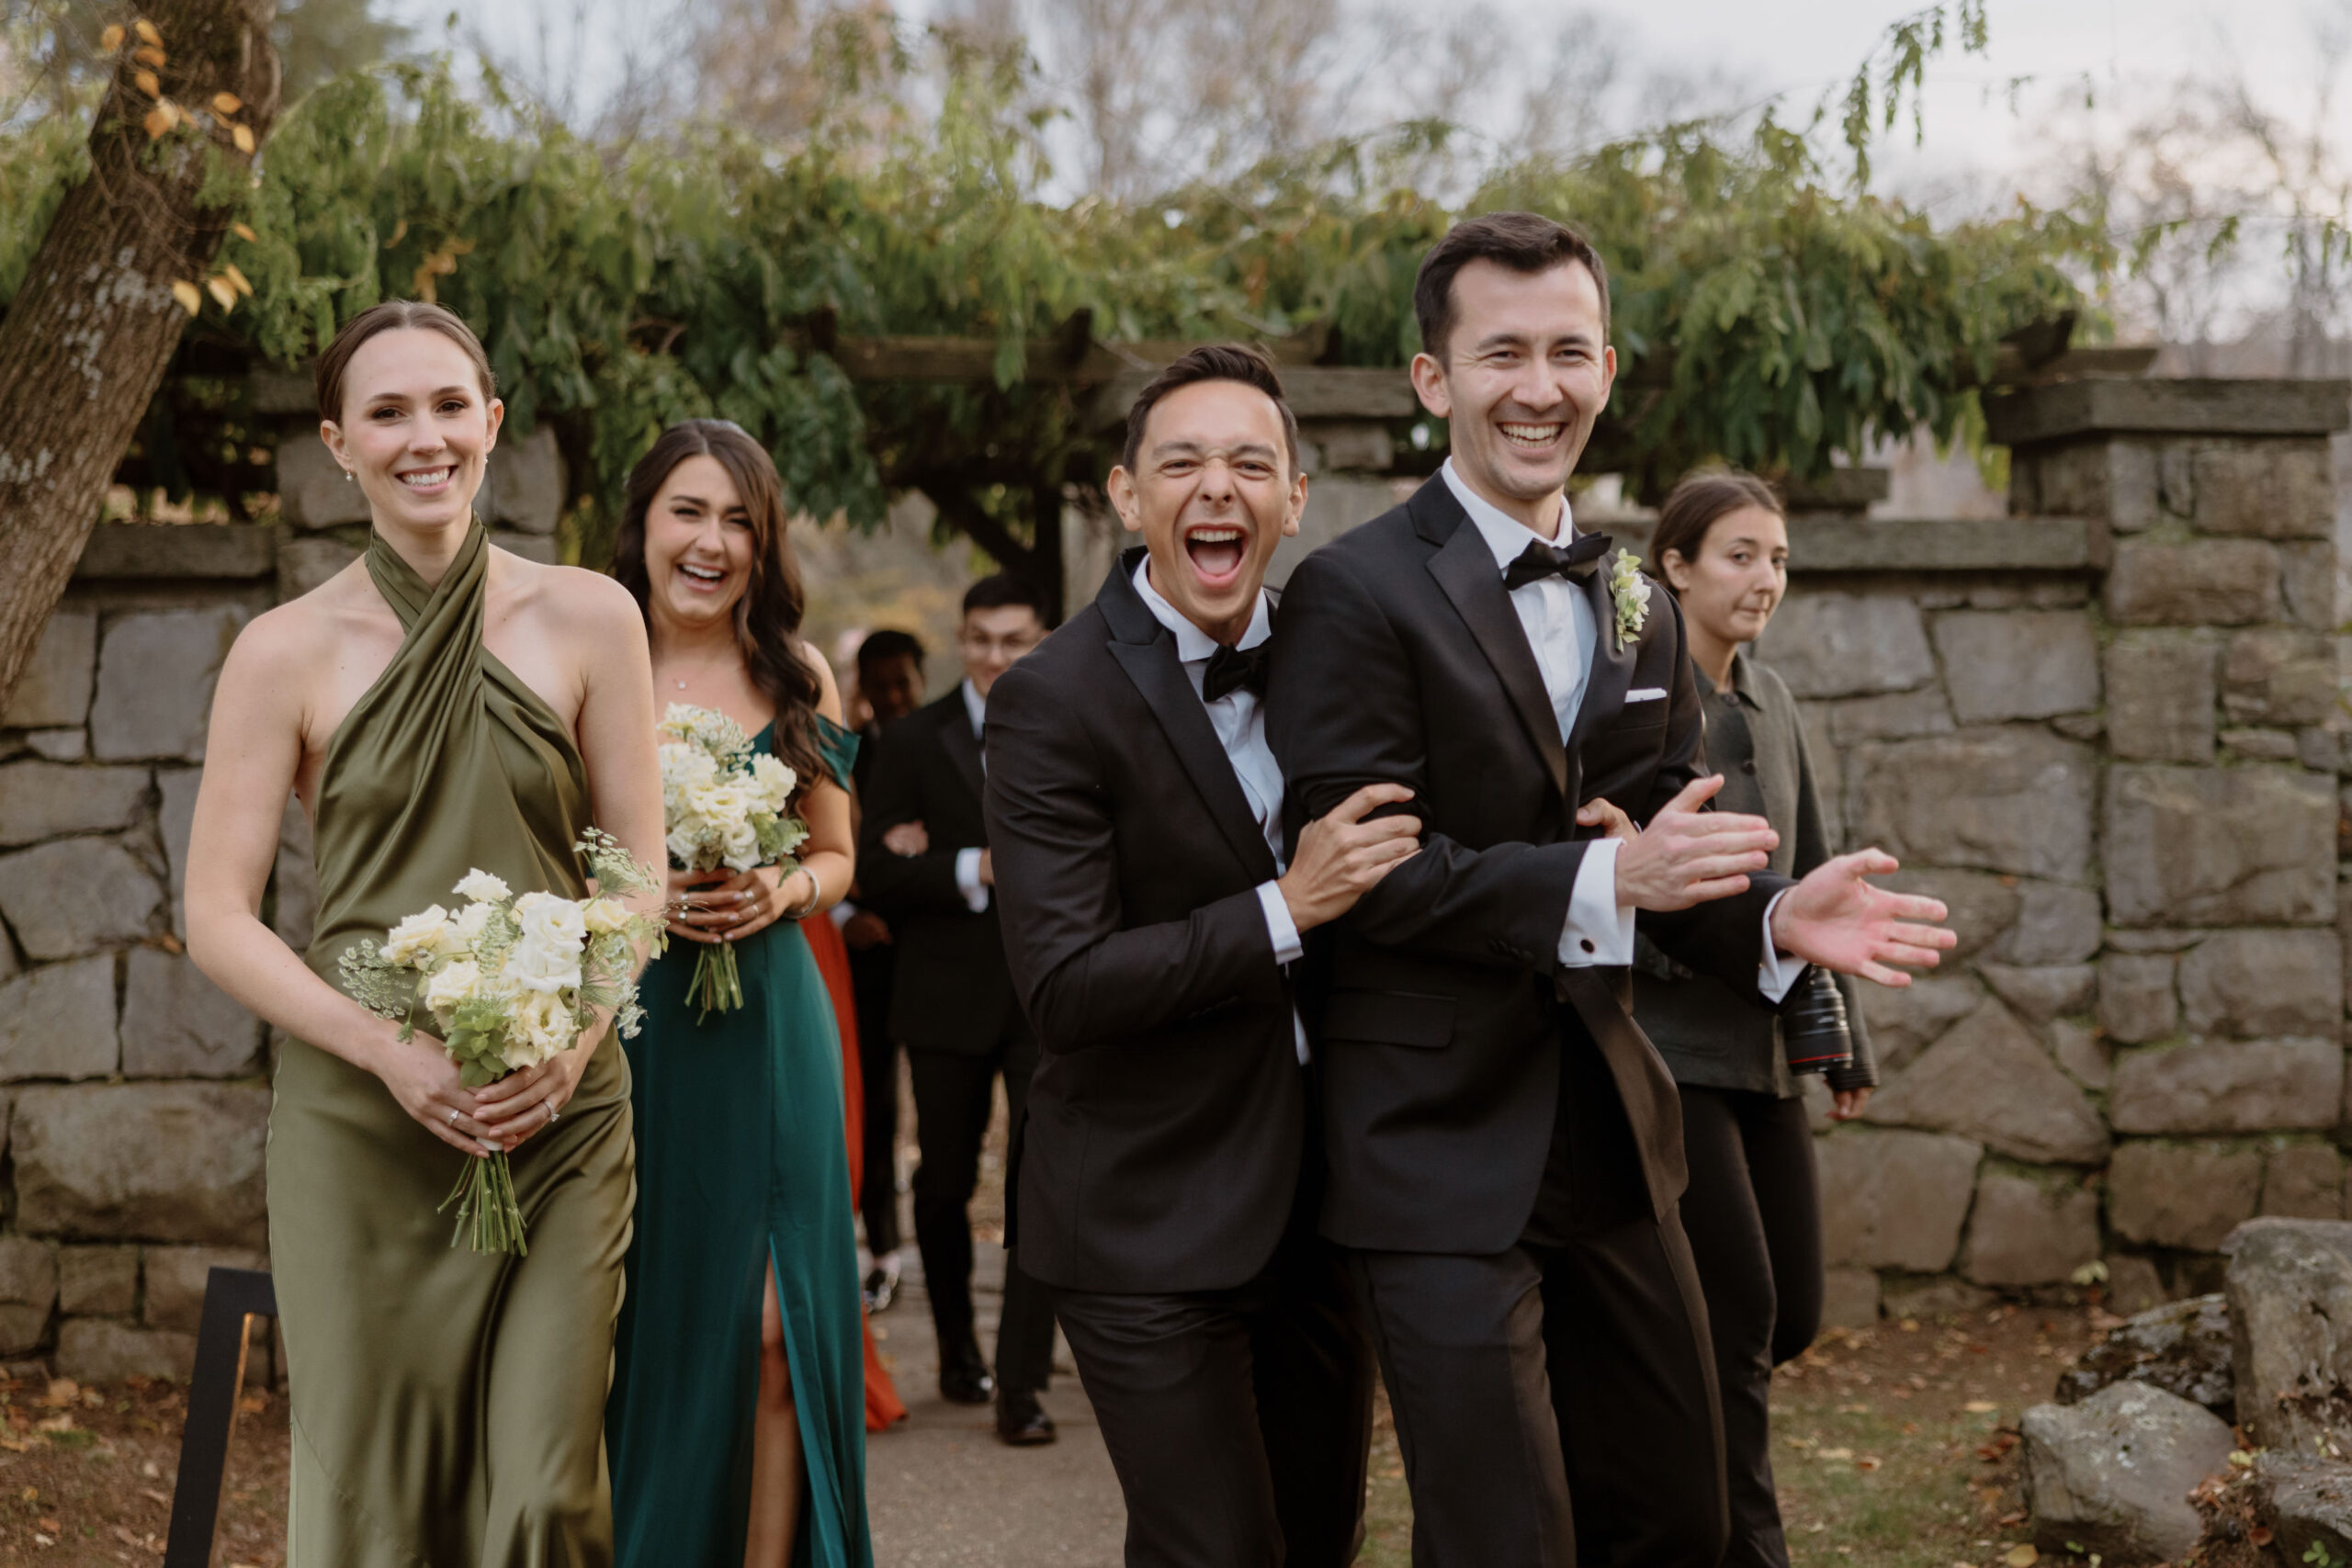 The bridesmaids and groomsmen smile at the camera while walking away after the wedding ceremony. Image by Jenny Fu Studio